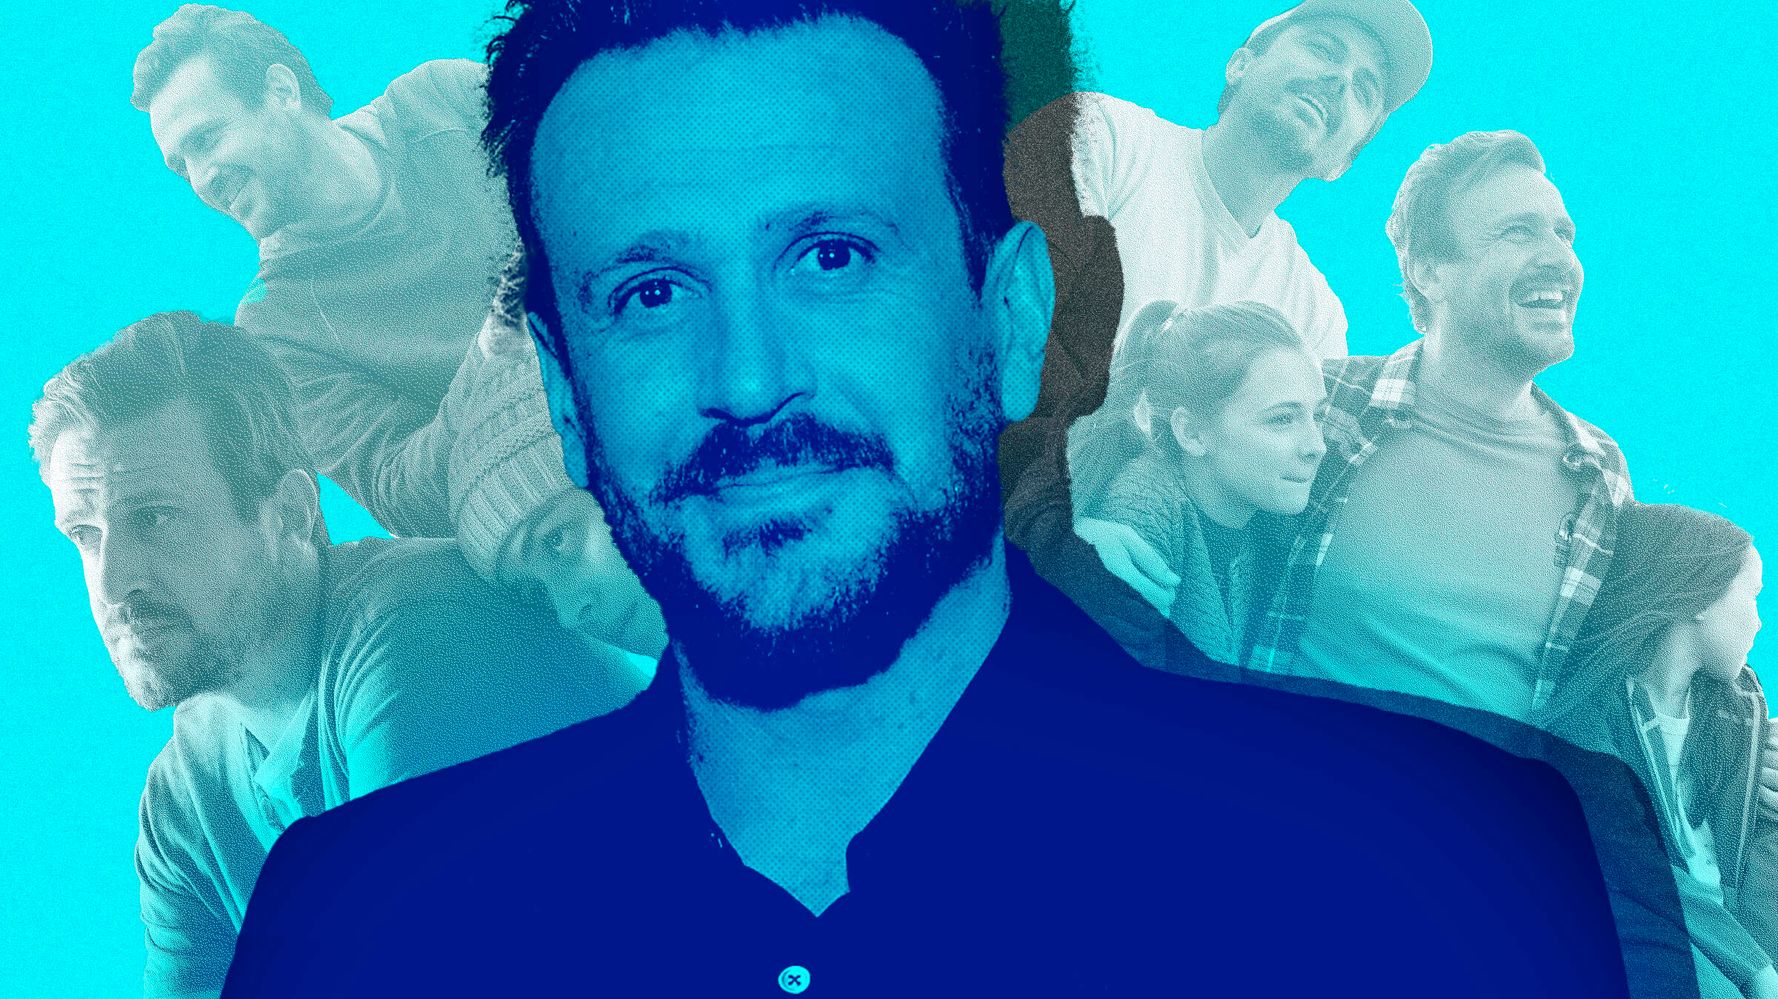 Jason Segel Has Mastered Comedy. Now, He’s Digging Deeper.